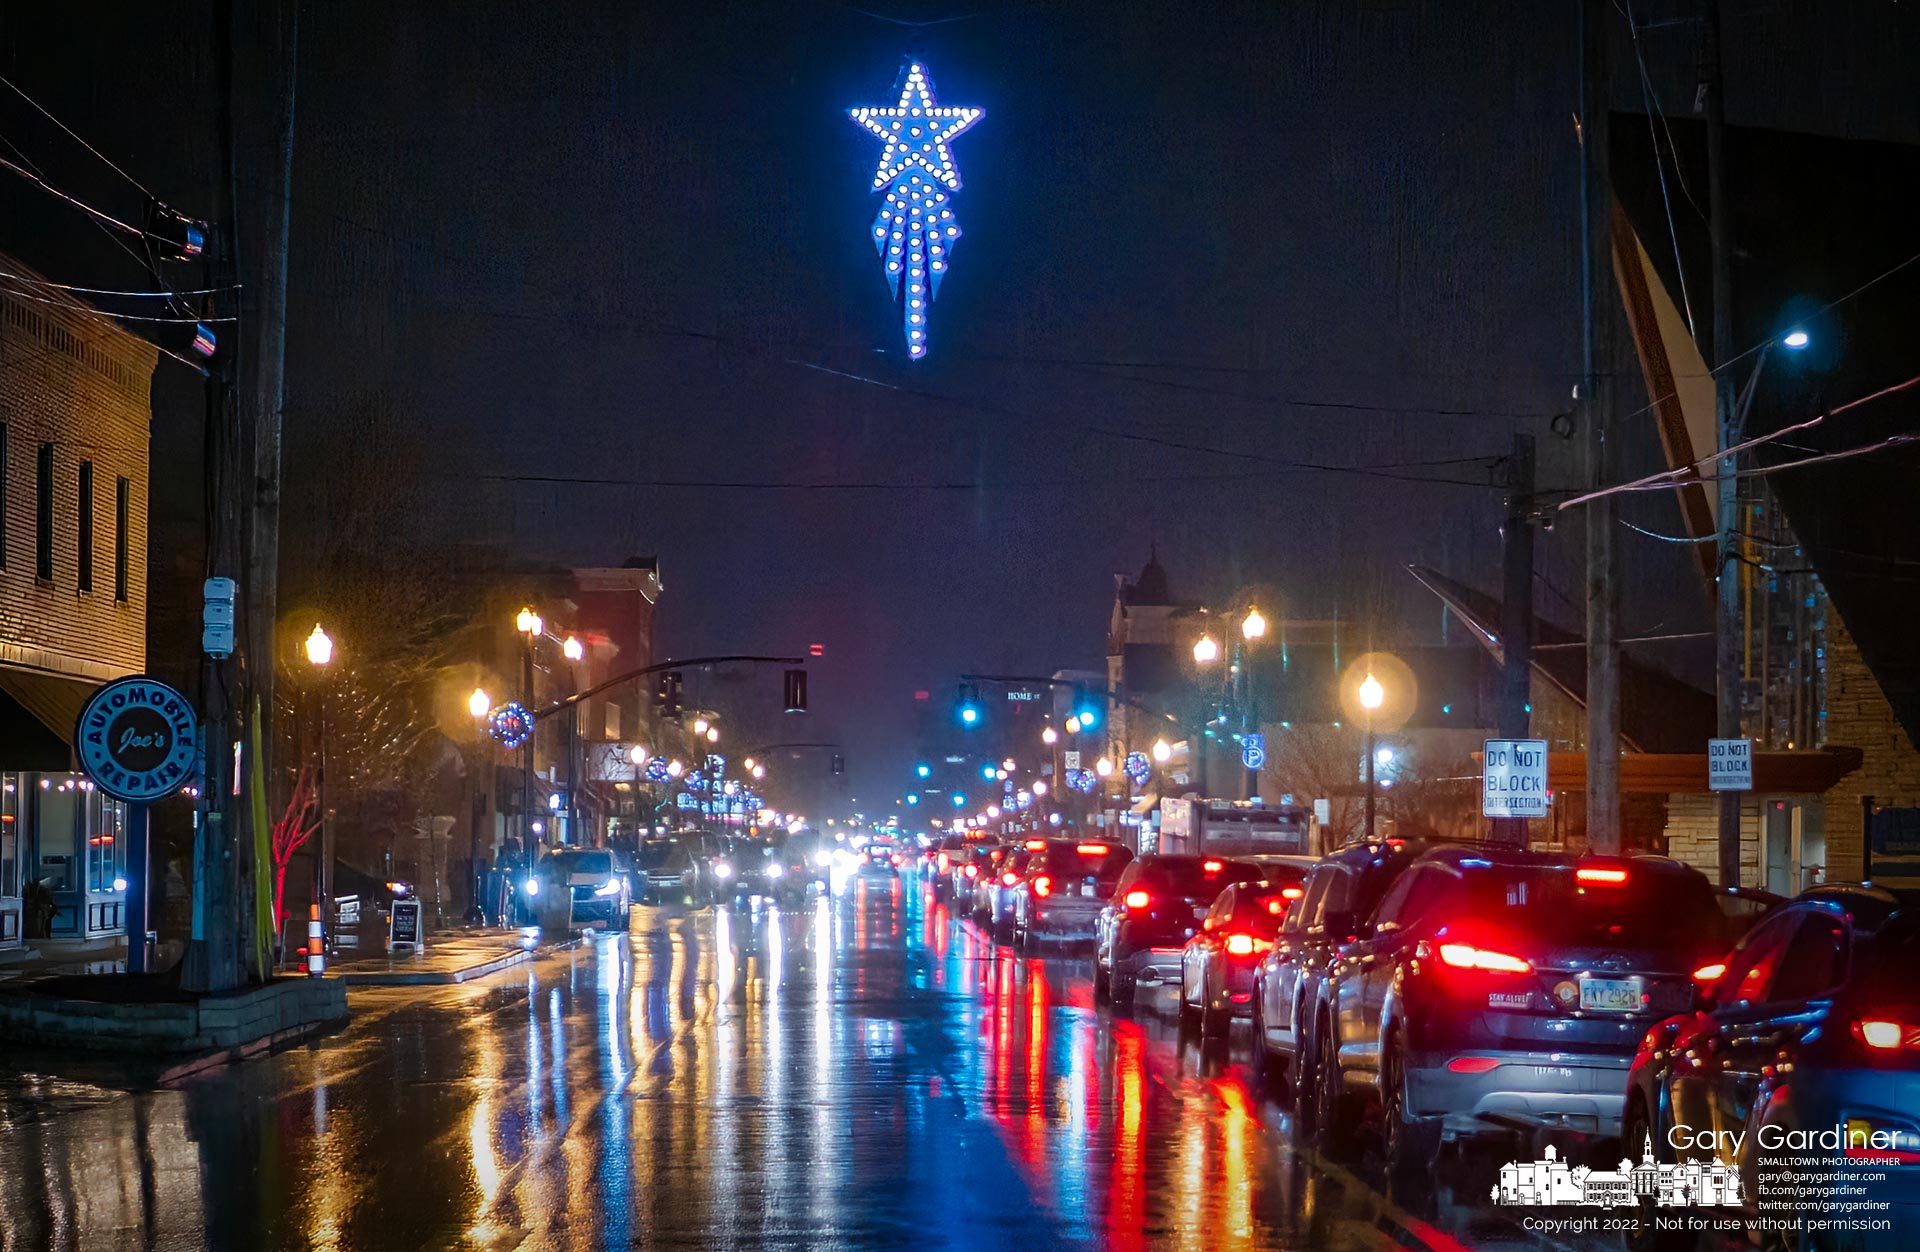 Shopper's and commuter's car lights reflect in the rain-slick streets of Uptown Westerville where the city's Holiday Star shines bright on a Friday night. My Final Photo for December 9, 2022.